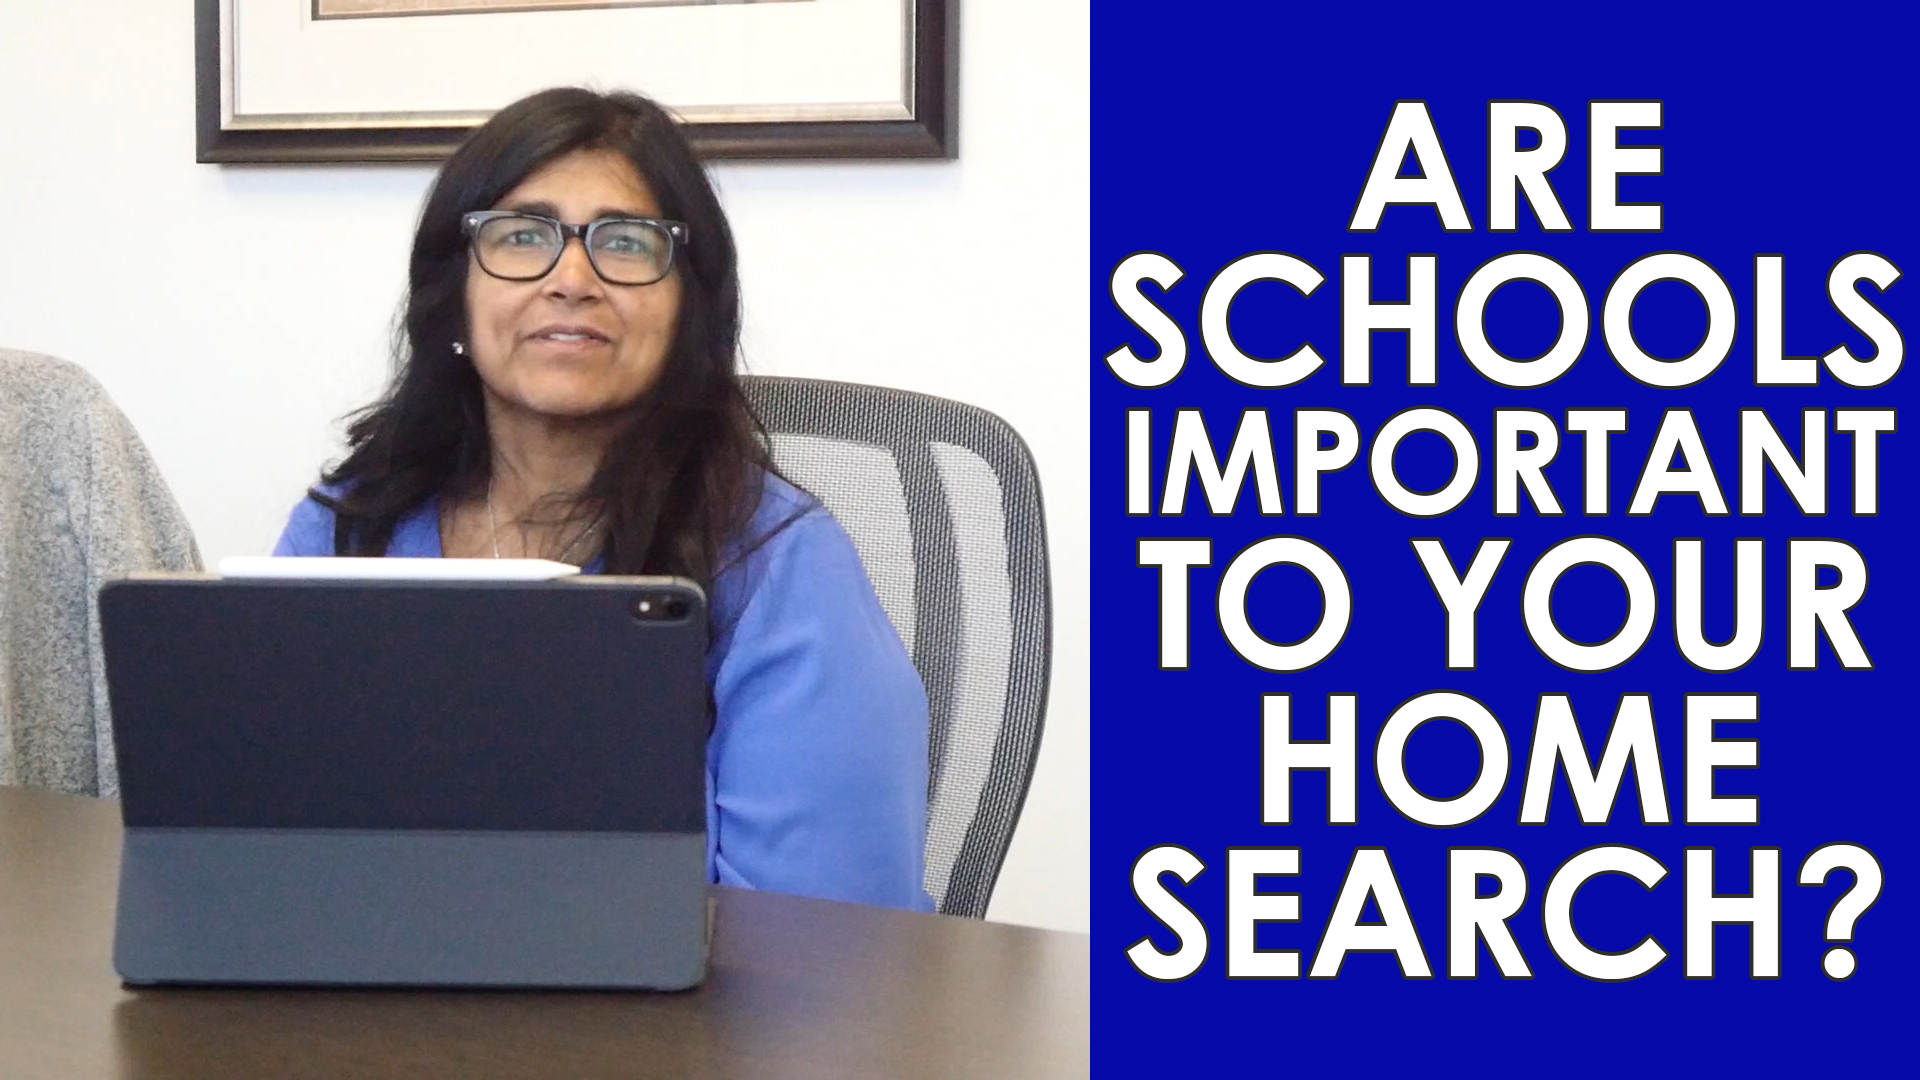 Are Schools Important to Your Home Search?